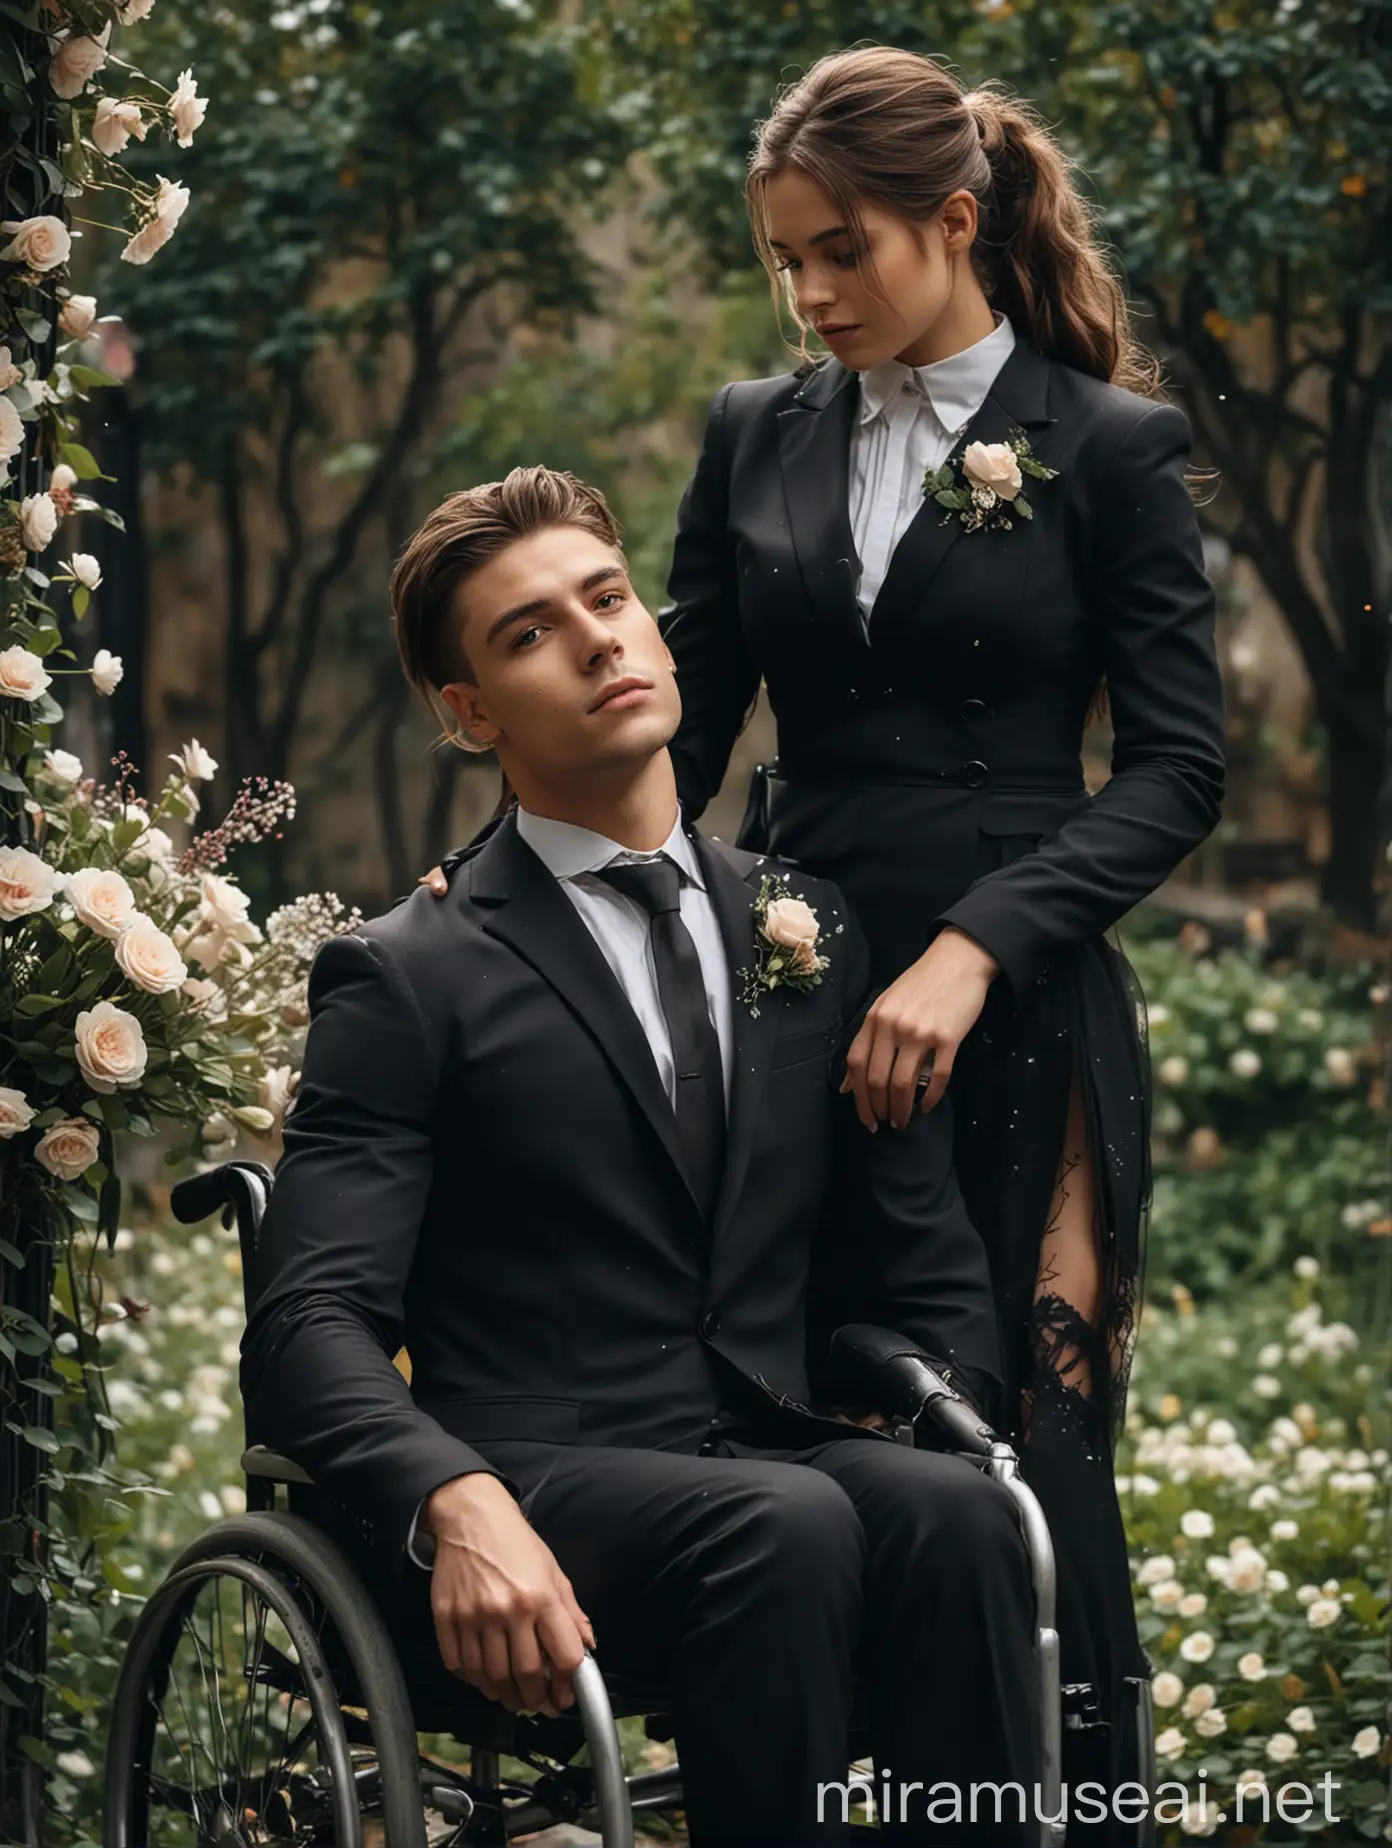 A beautiful lady in black fitted dress, standing behind a crippled handsome young muscular man in suit, that is sitting on a wheelchair, holding him romantically with flowers falling around them